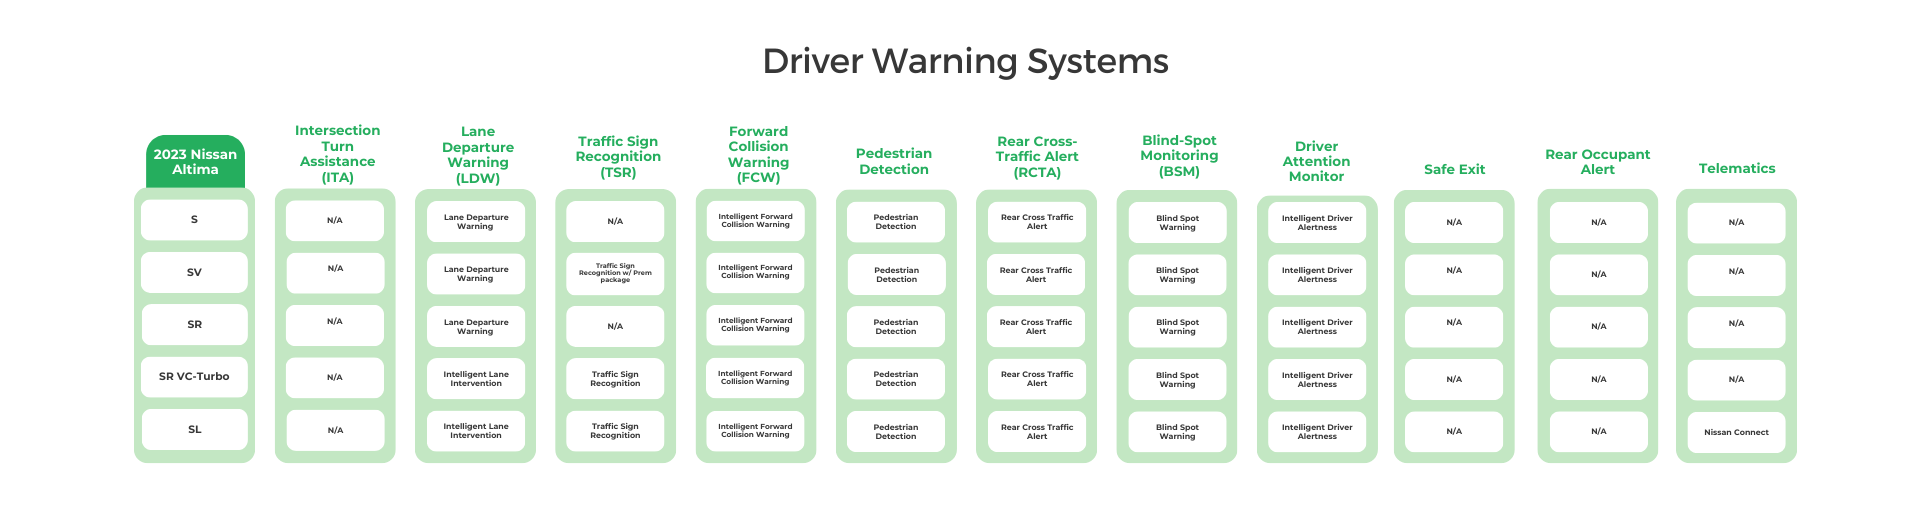 2023 Nissan Altima Driver Warning Systems